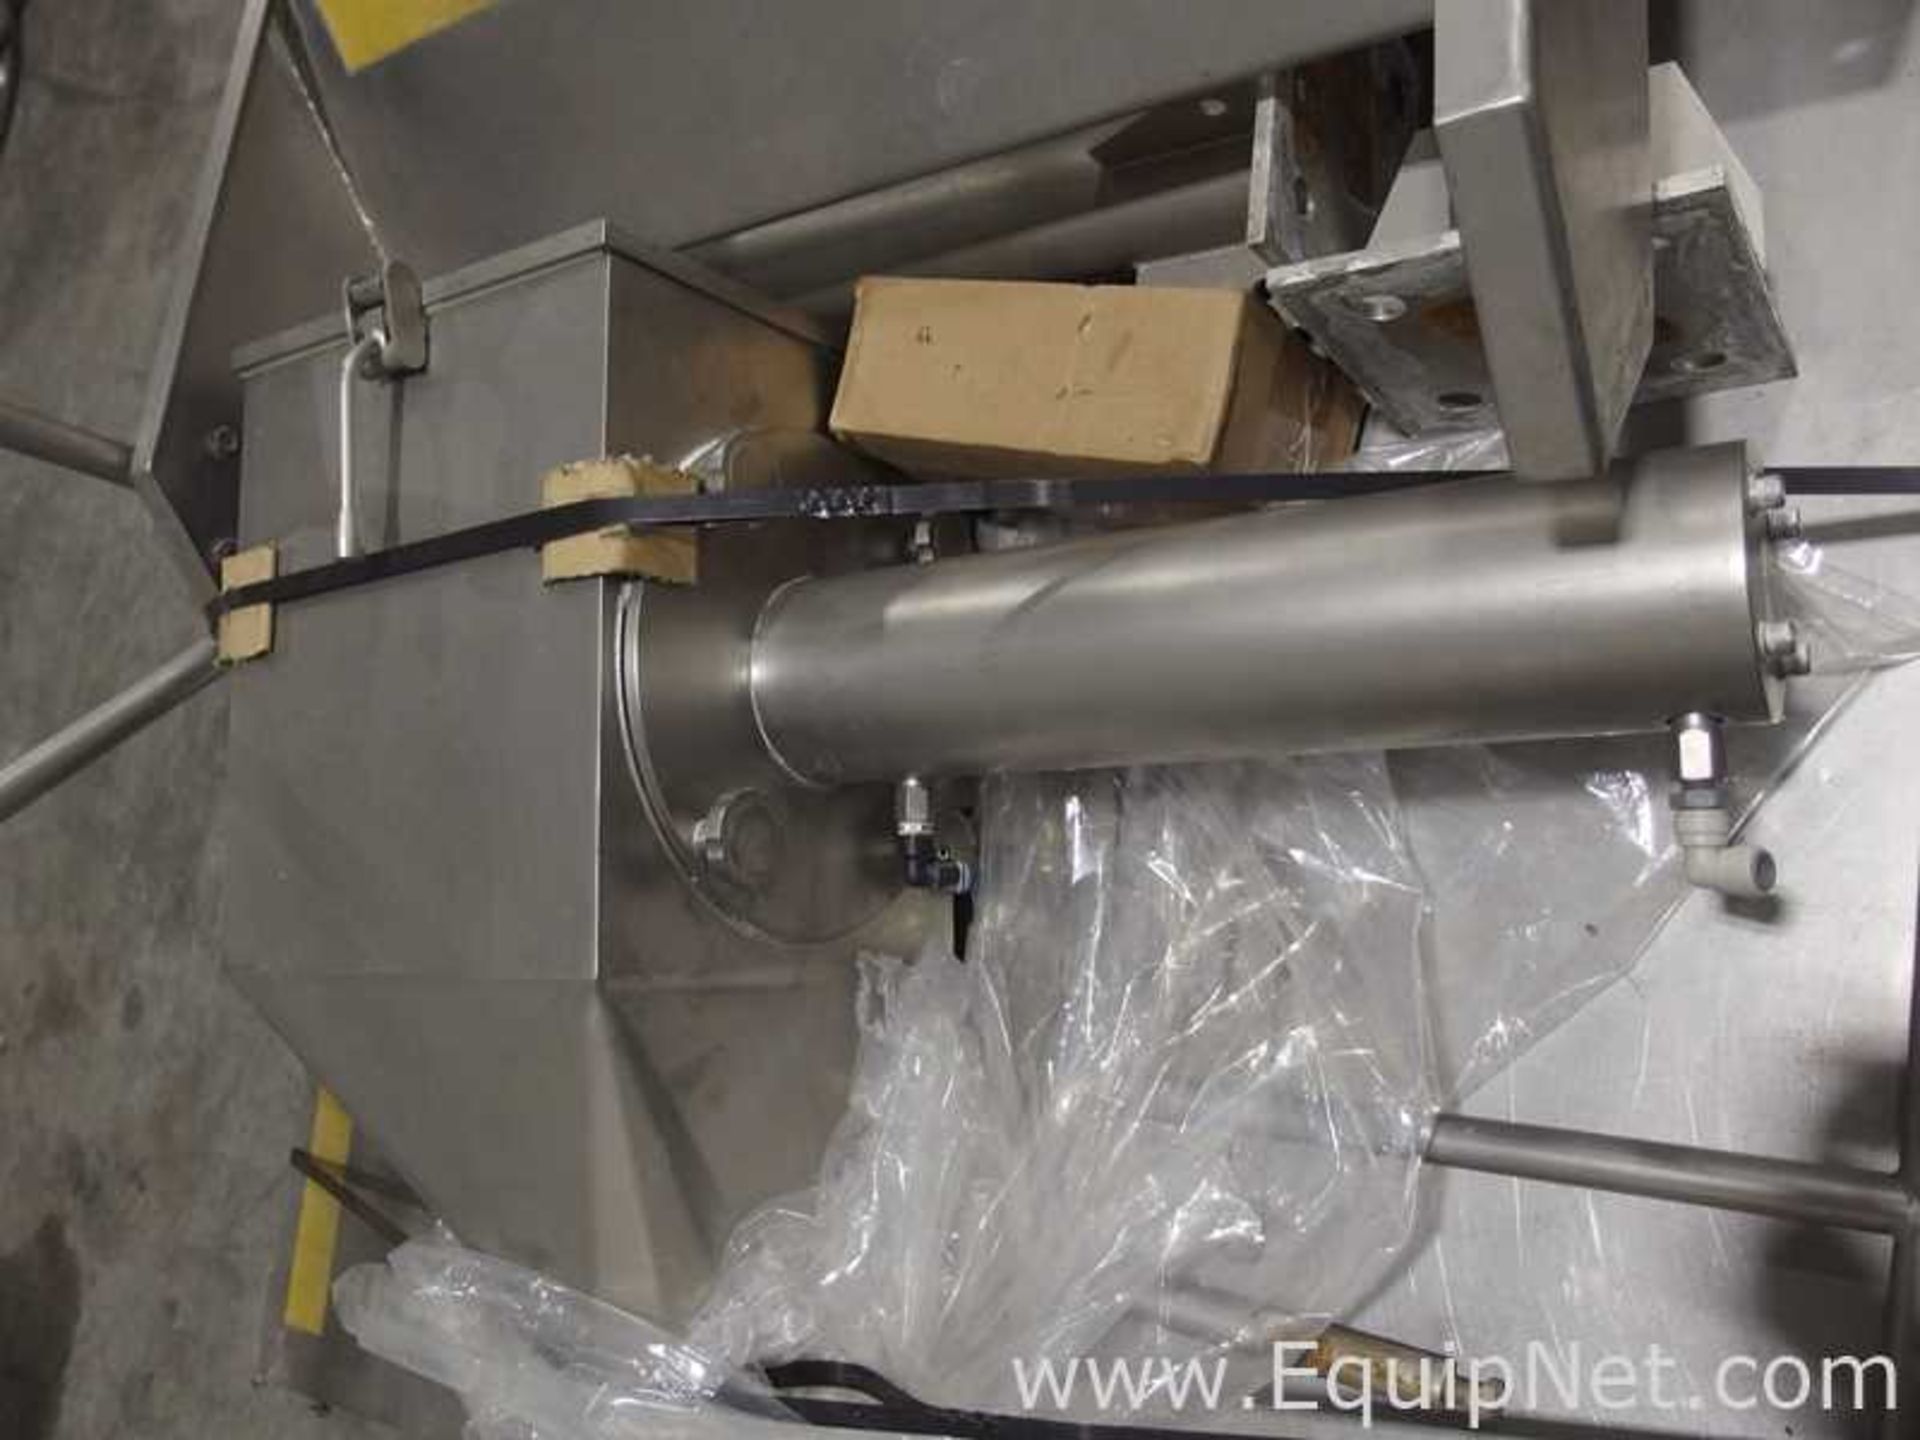 Mendel Fluid Bed Dryer Suite with High Shear Mixer - Image 16 of 56